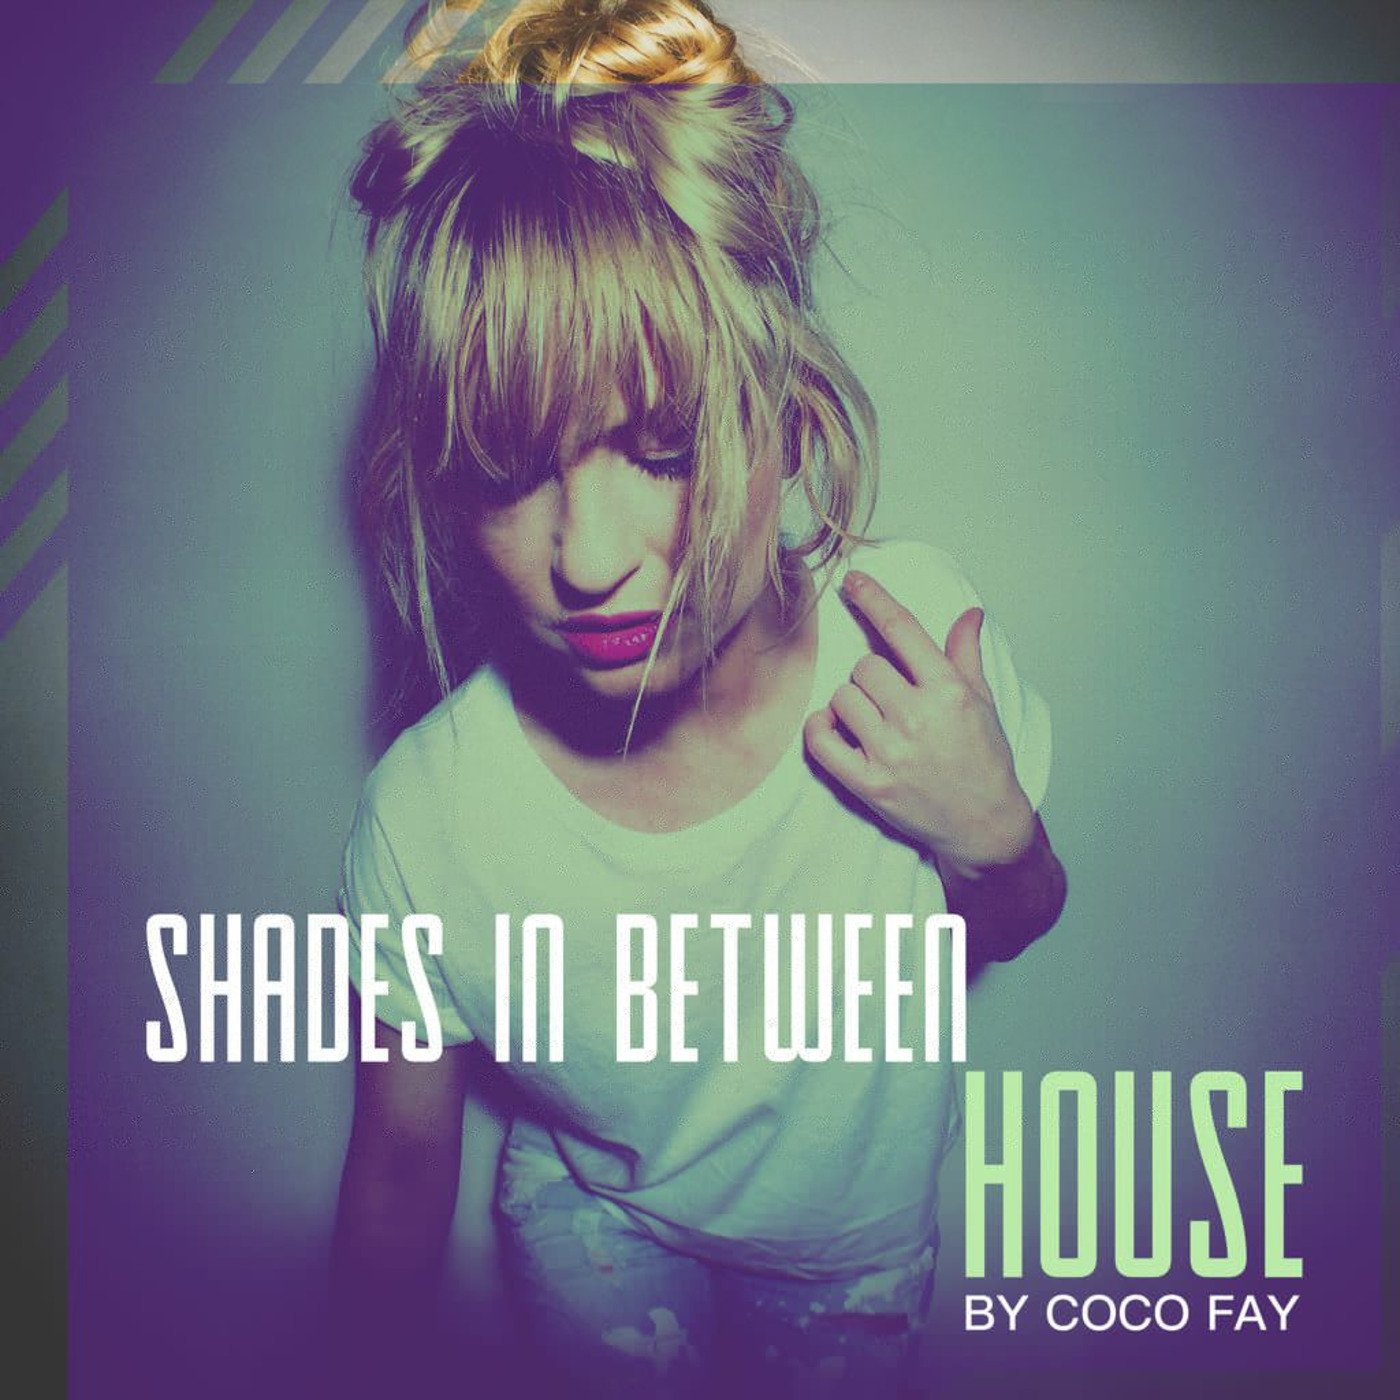 Shades of House Music #007 by Coco Fay